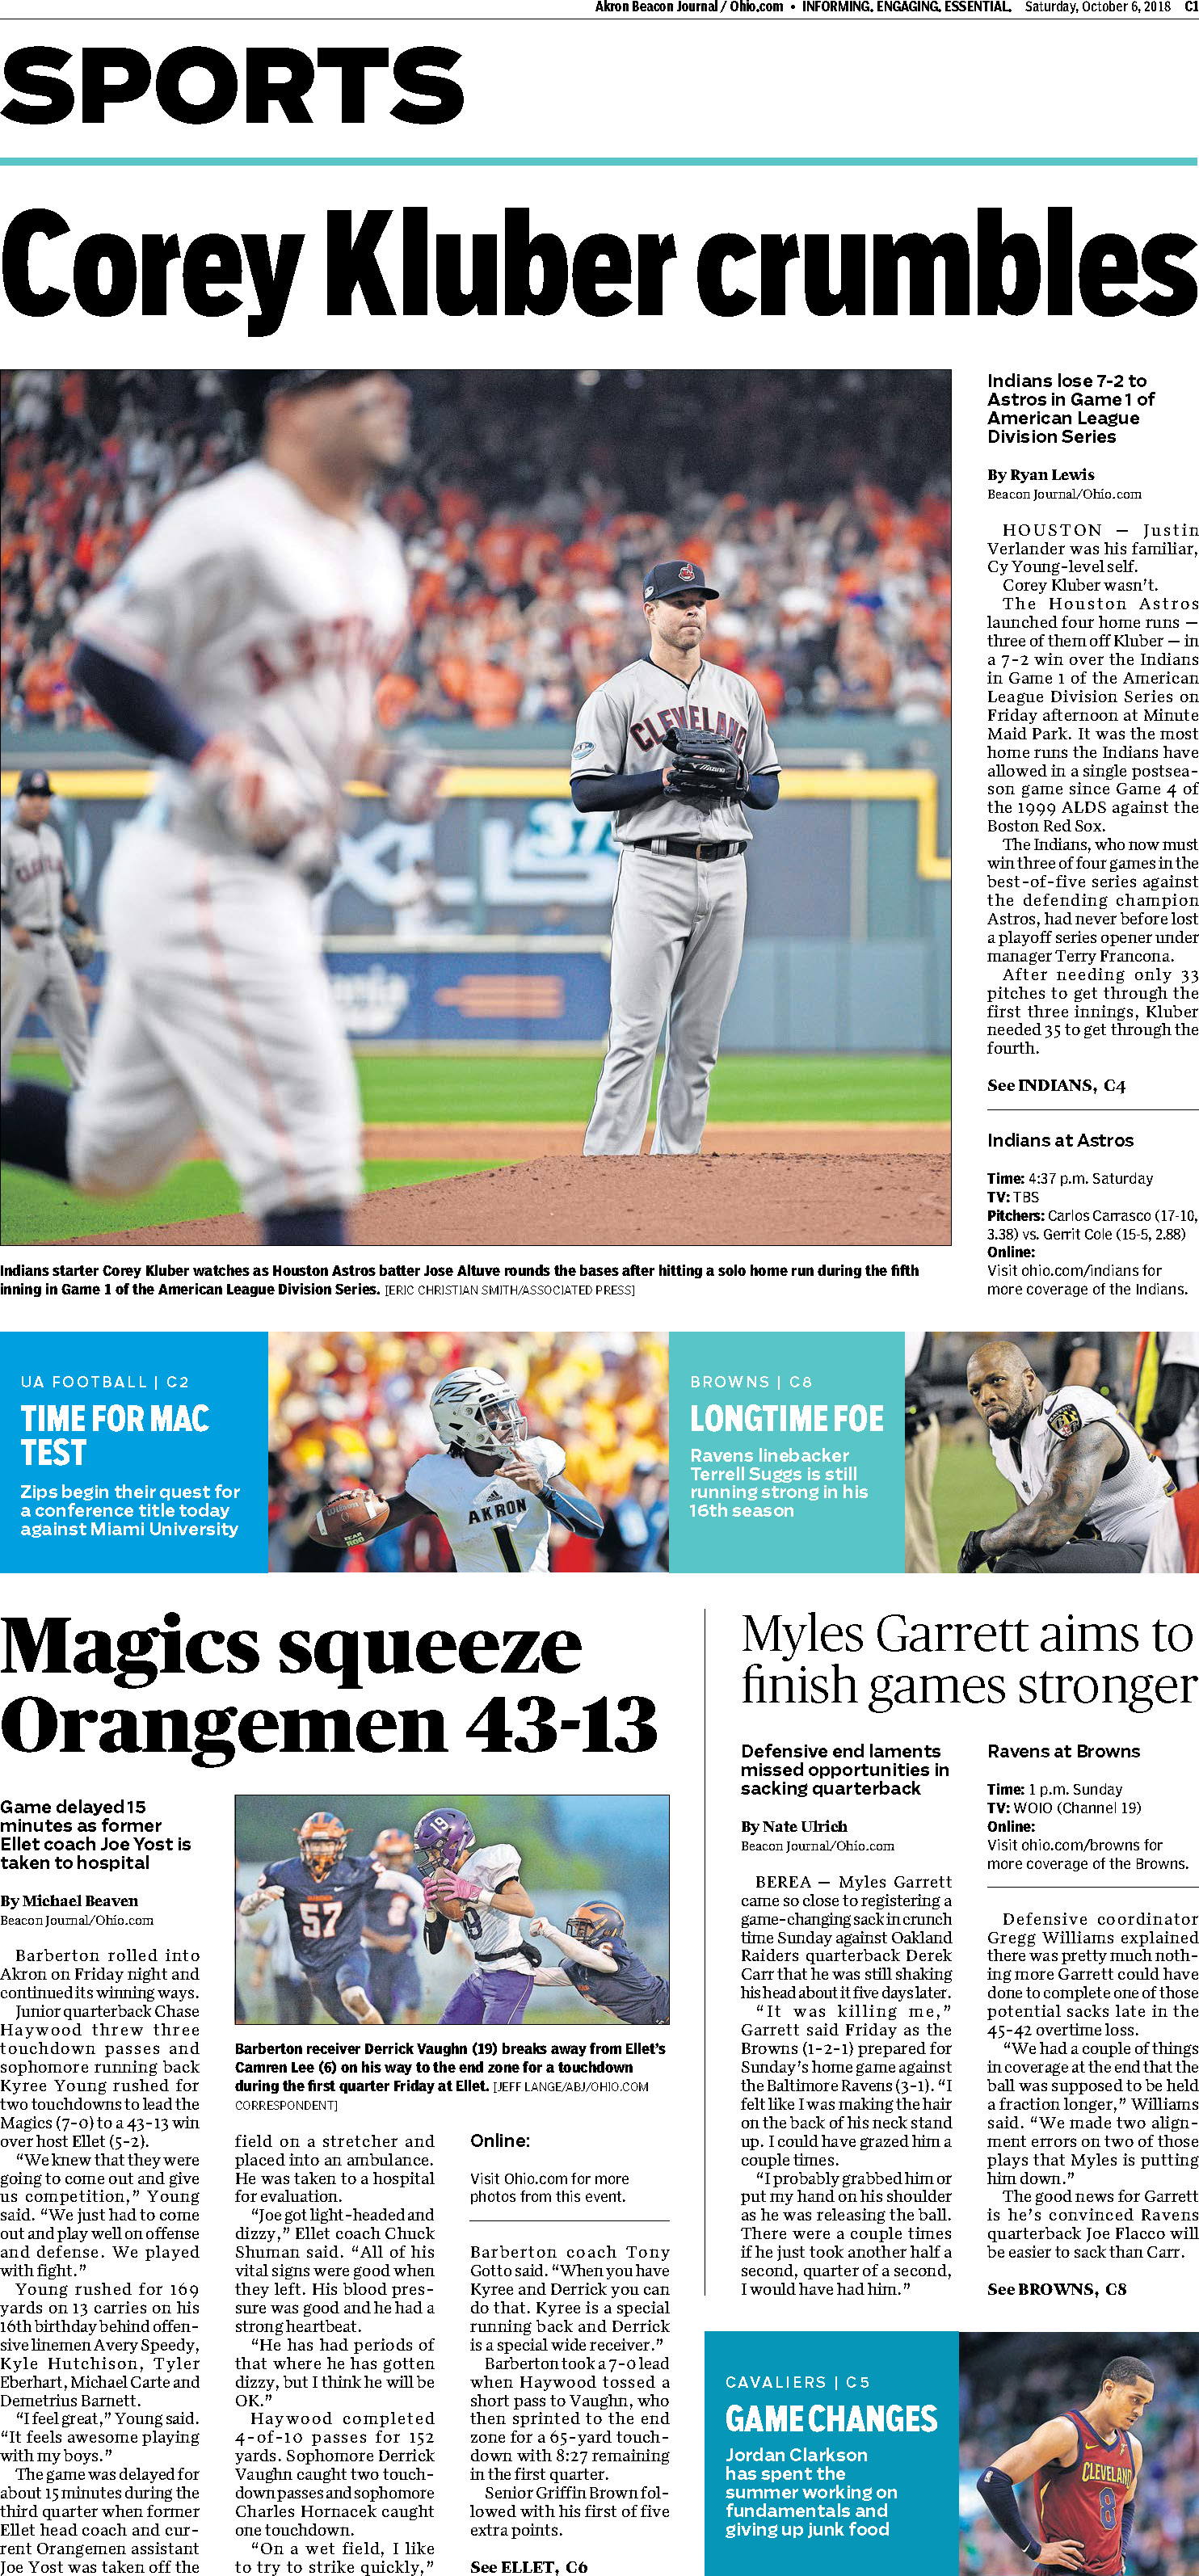 1006_OH_Akron C1 - Sports Cover.jpg